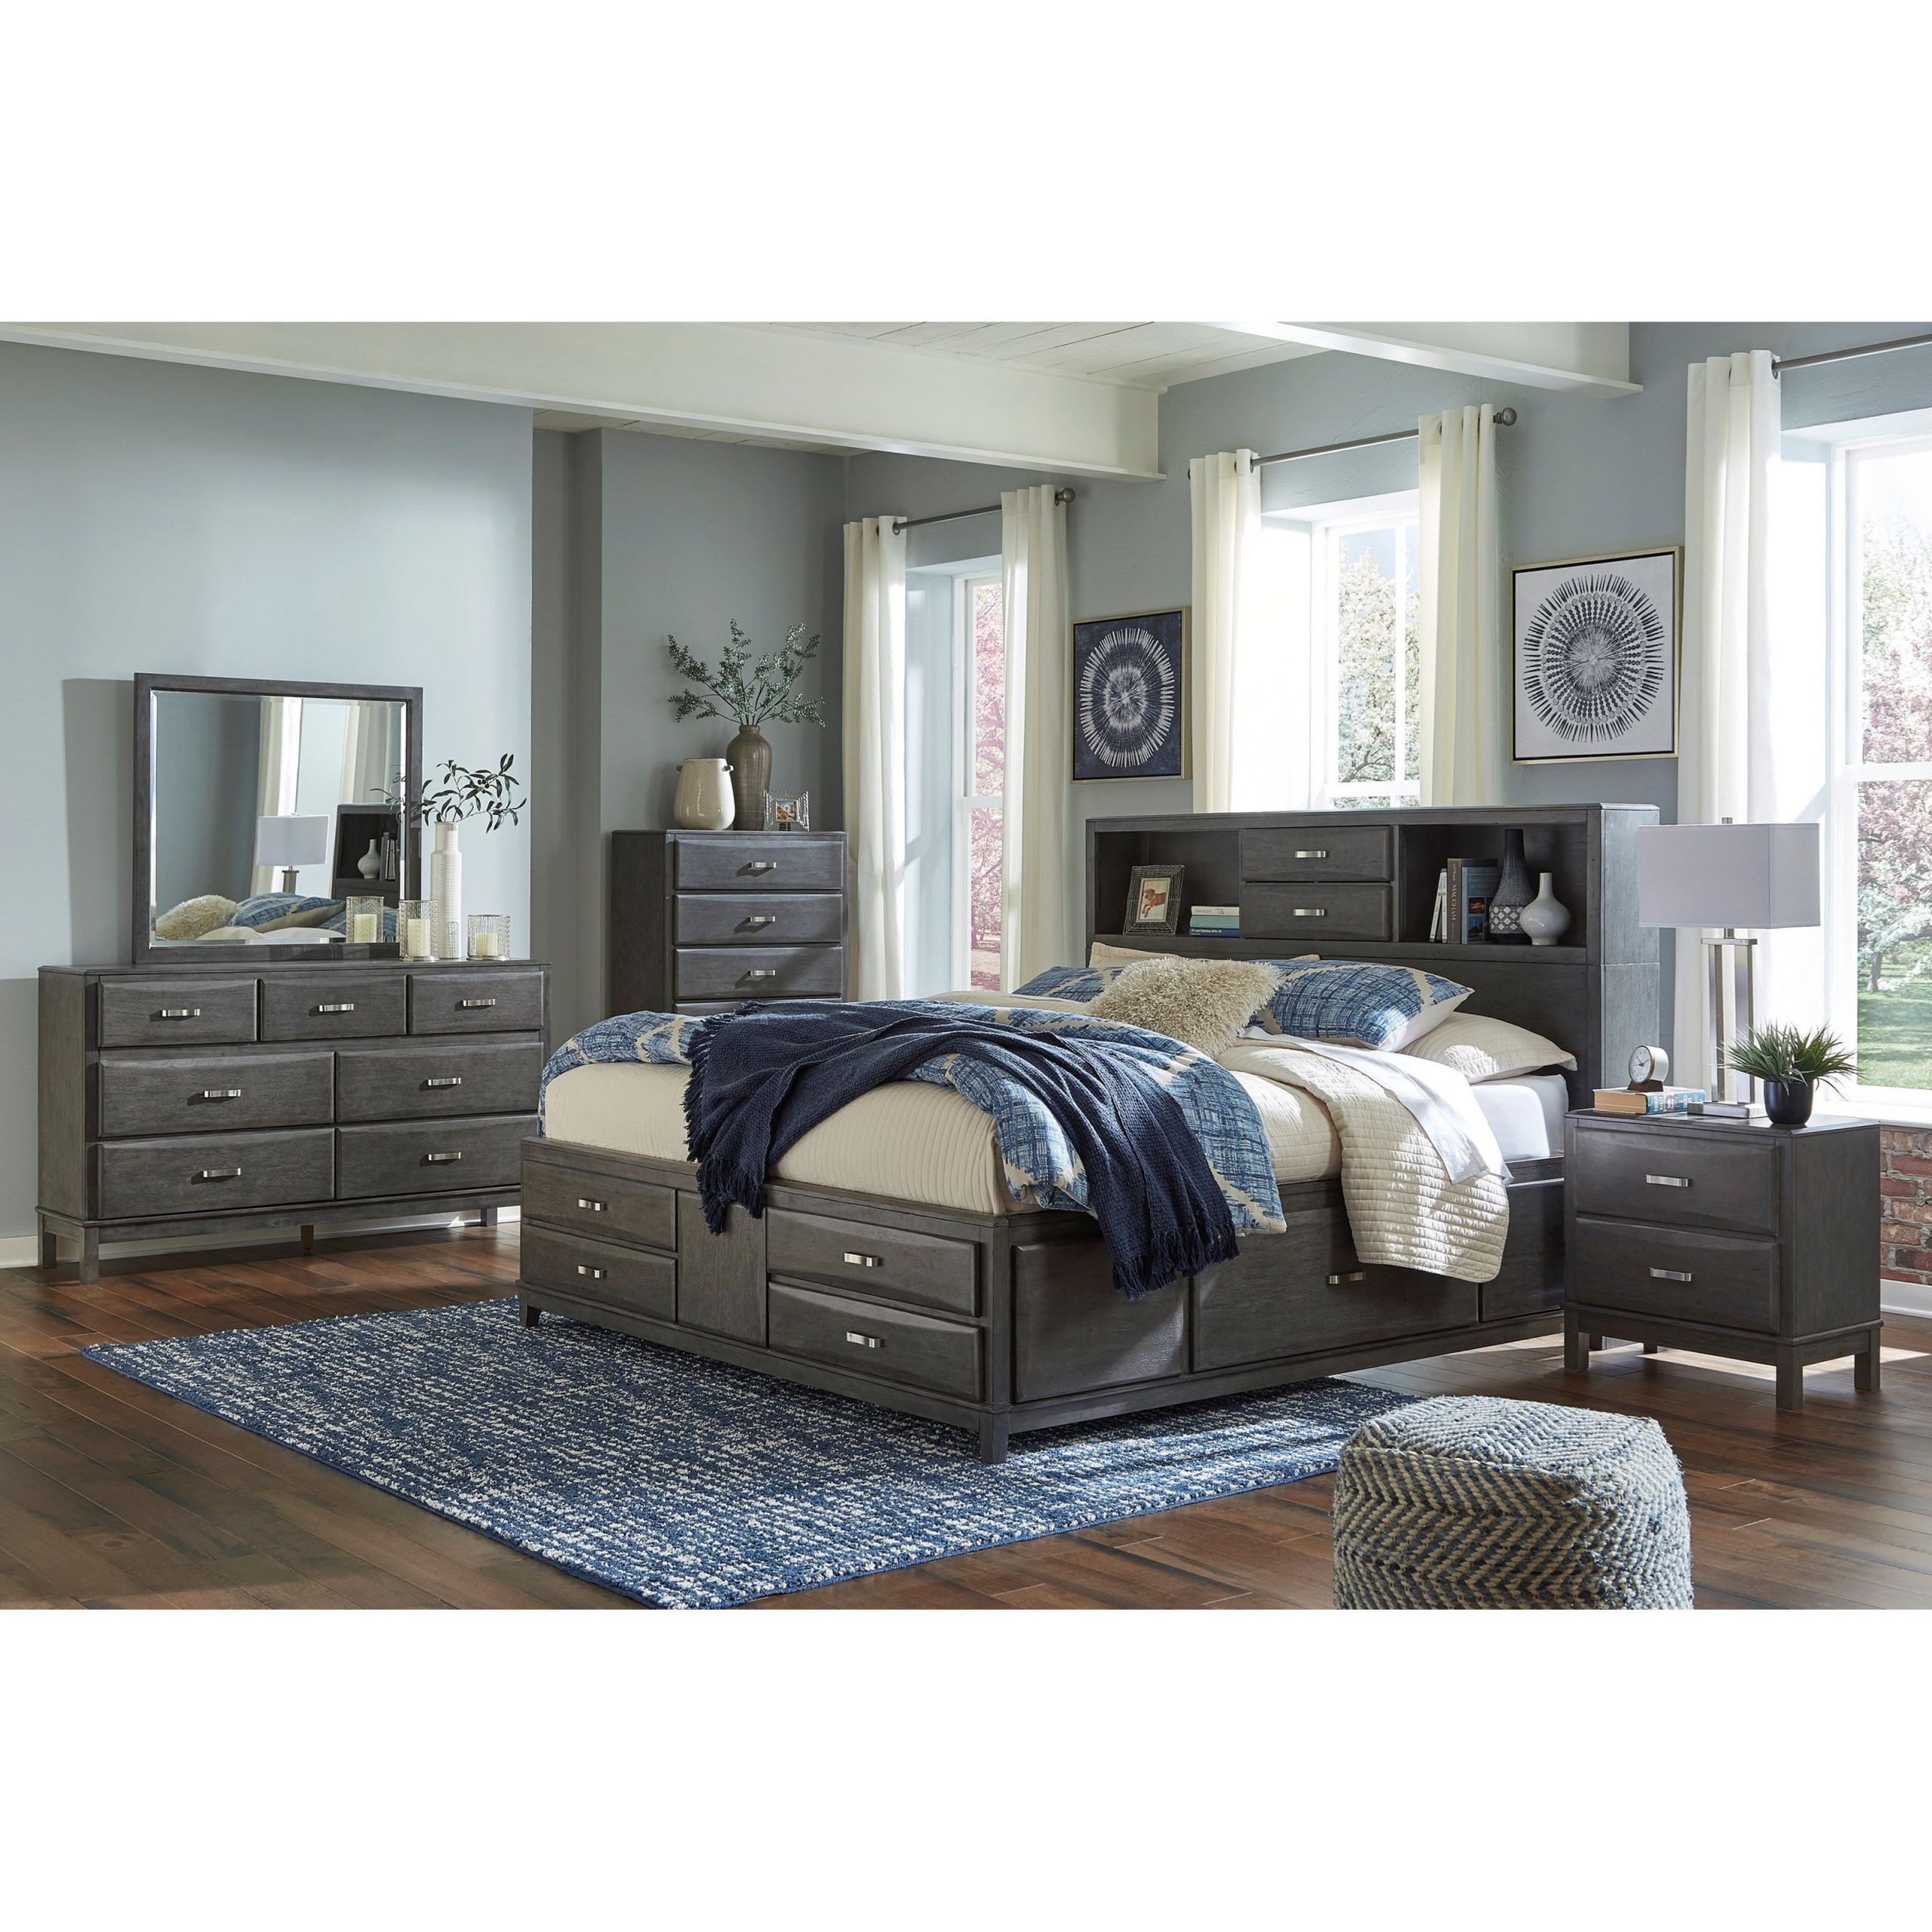 Full Size Storage Bedroom Sets
 Caitbrook Full Bedroom Group by Signature Design by Ashley